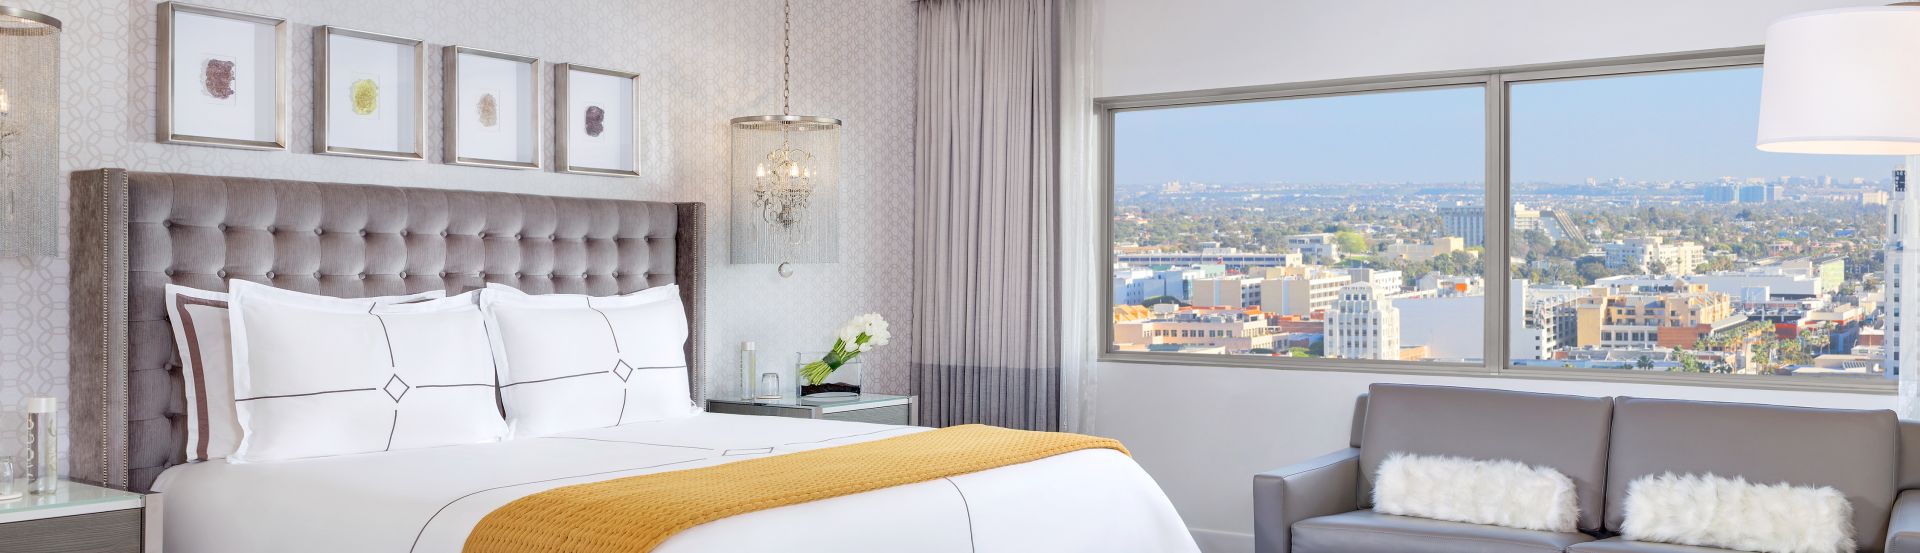 HUNTLEY KING Hotel Rooms Breathtaking Views of the pacific ocean and Santa Monica Cityscape 